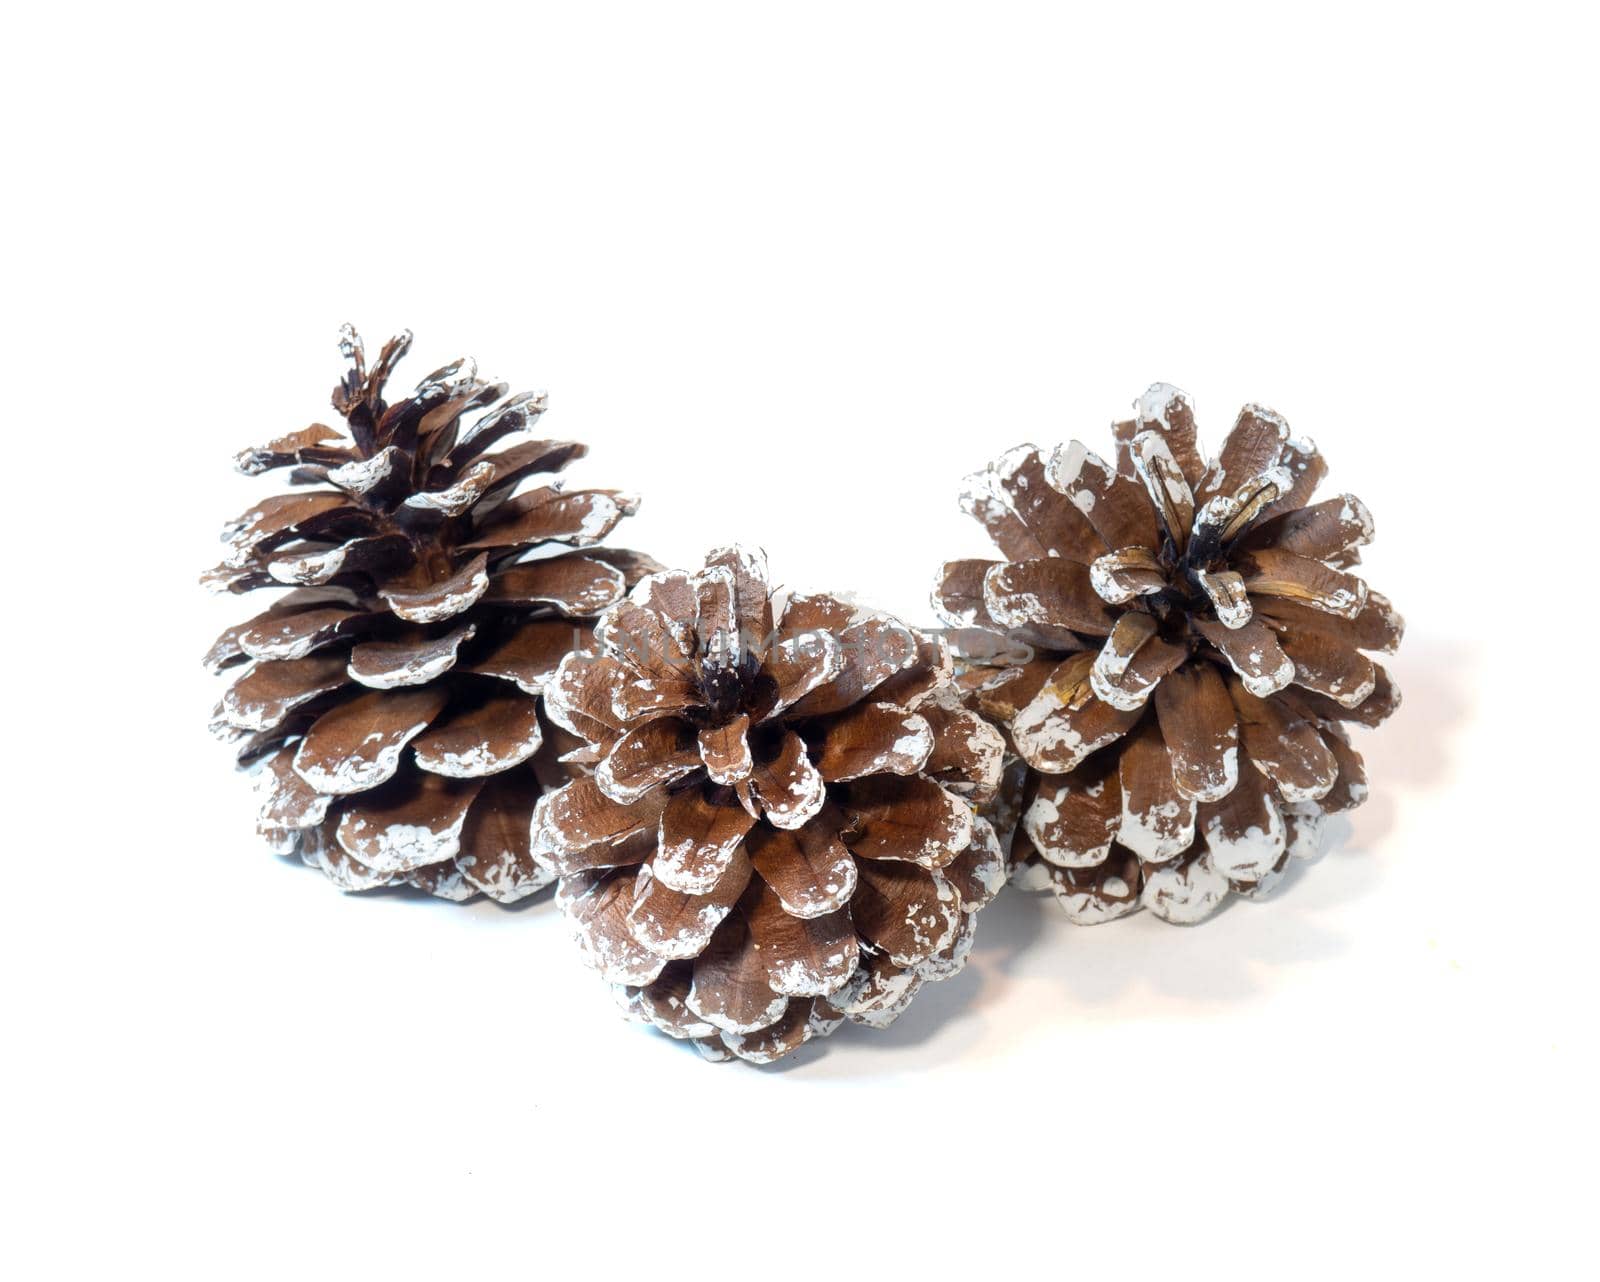 Pine cones in the snow. by Puludi